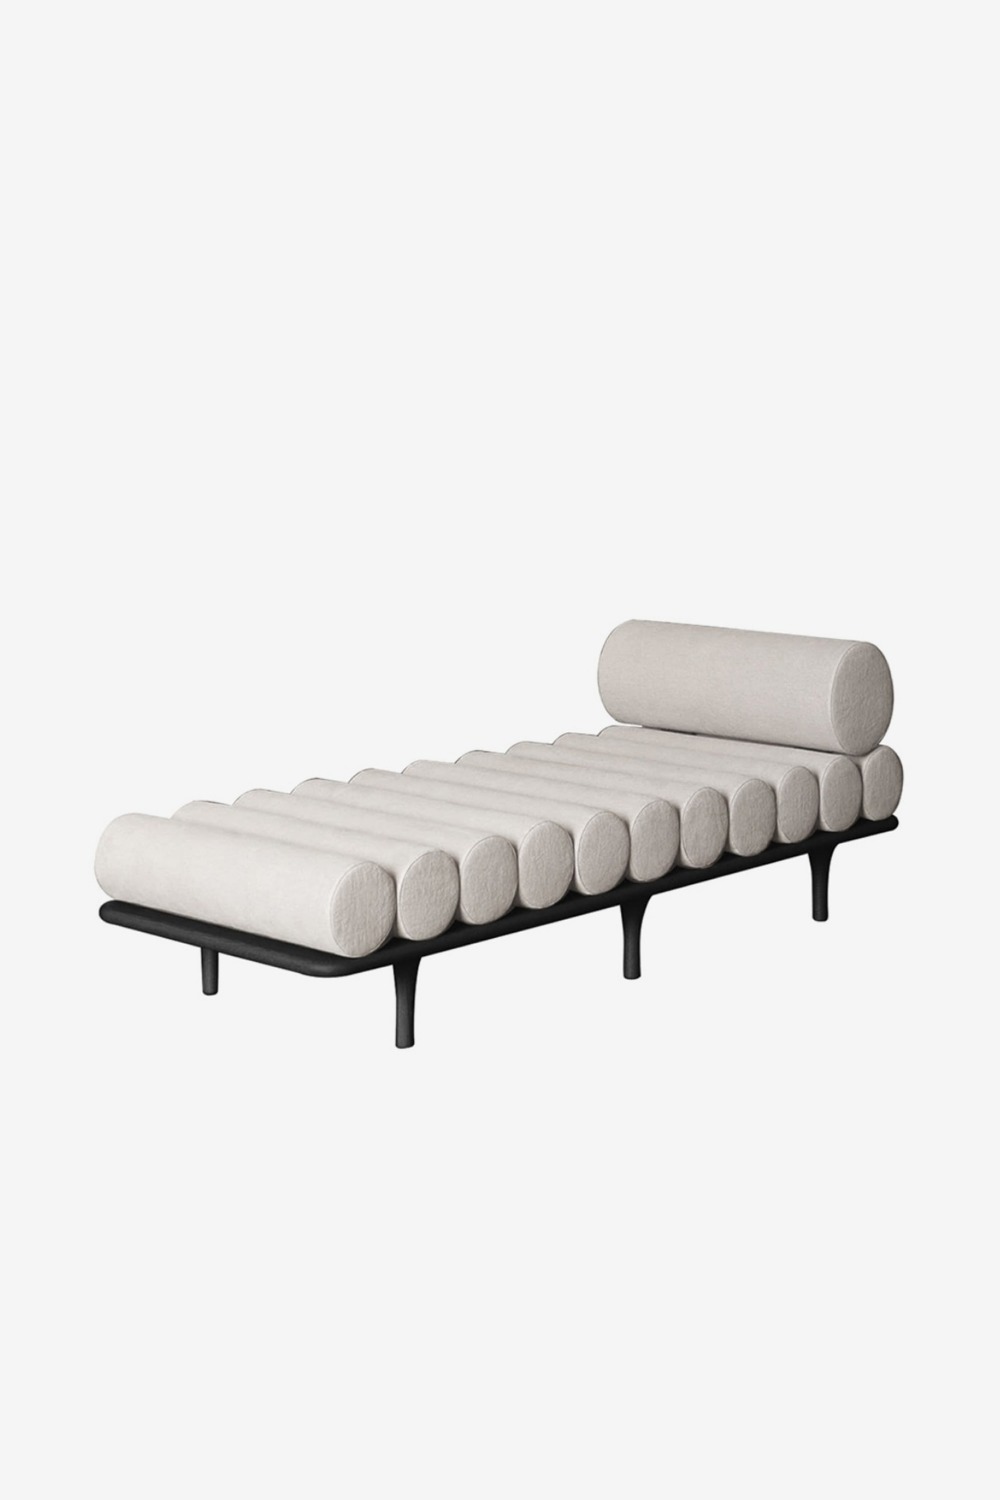 [Tacchini] Five to Nine Daybed(with Headrest)